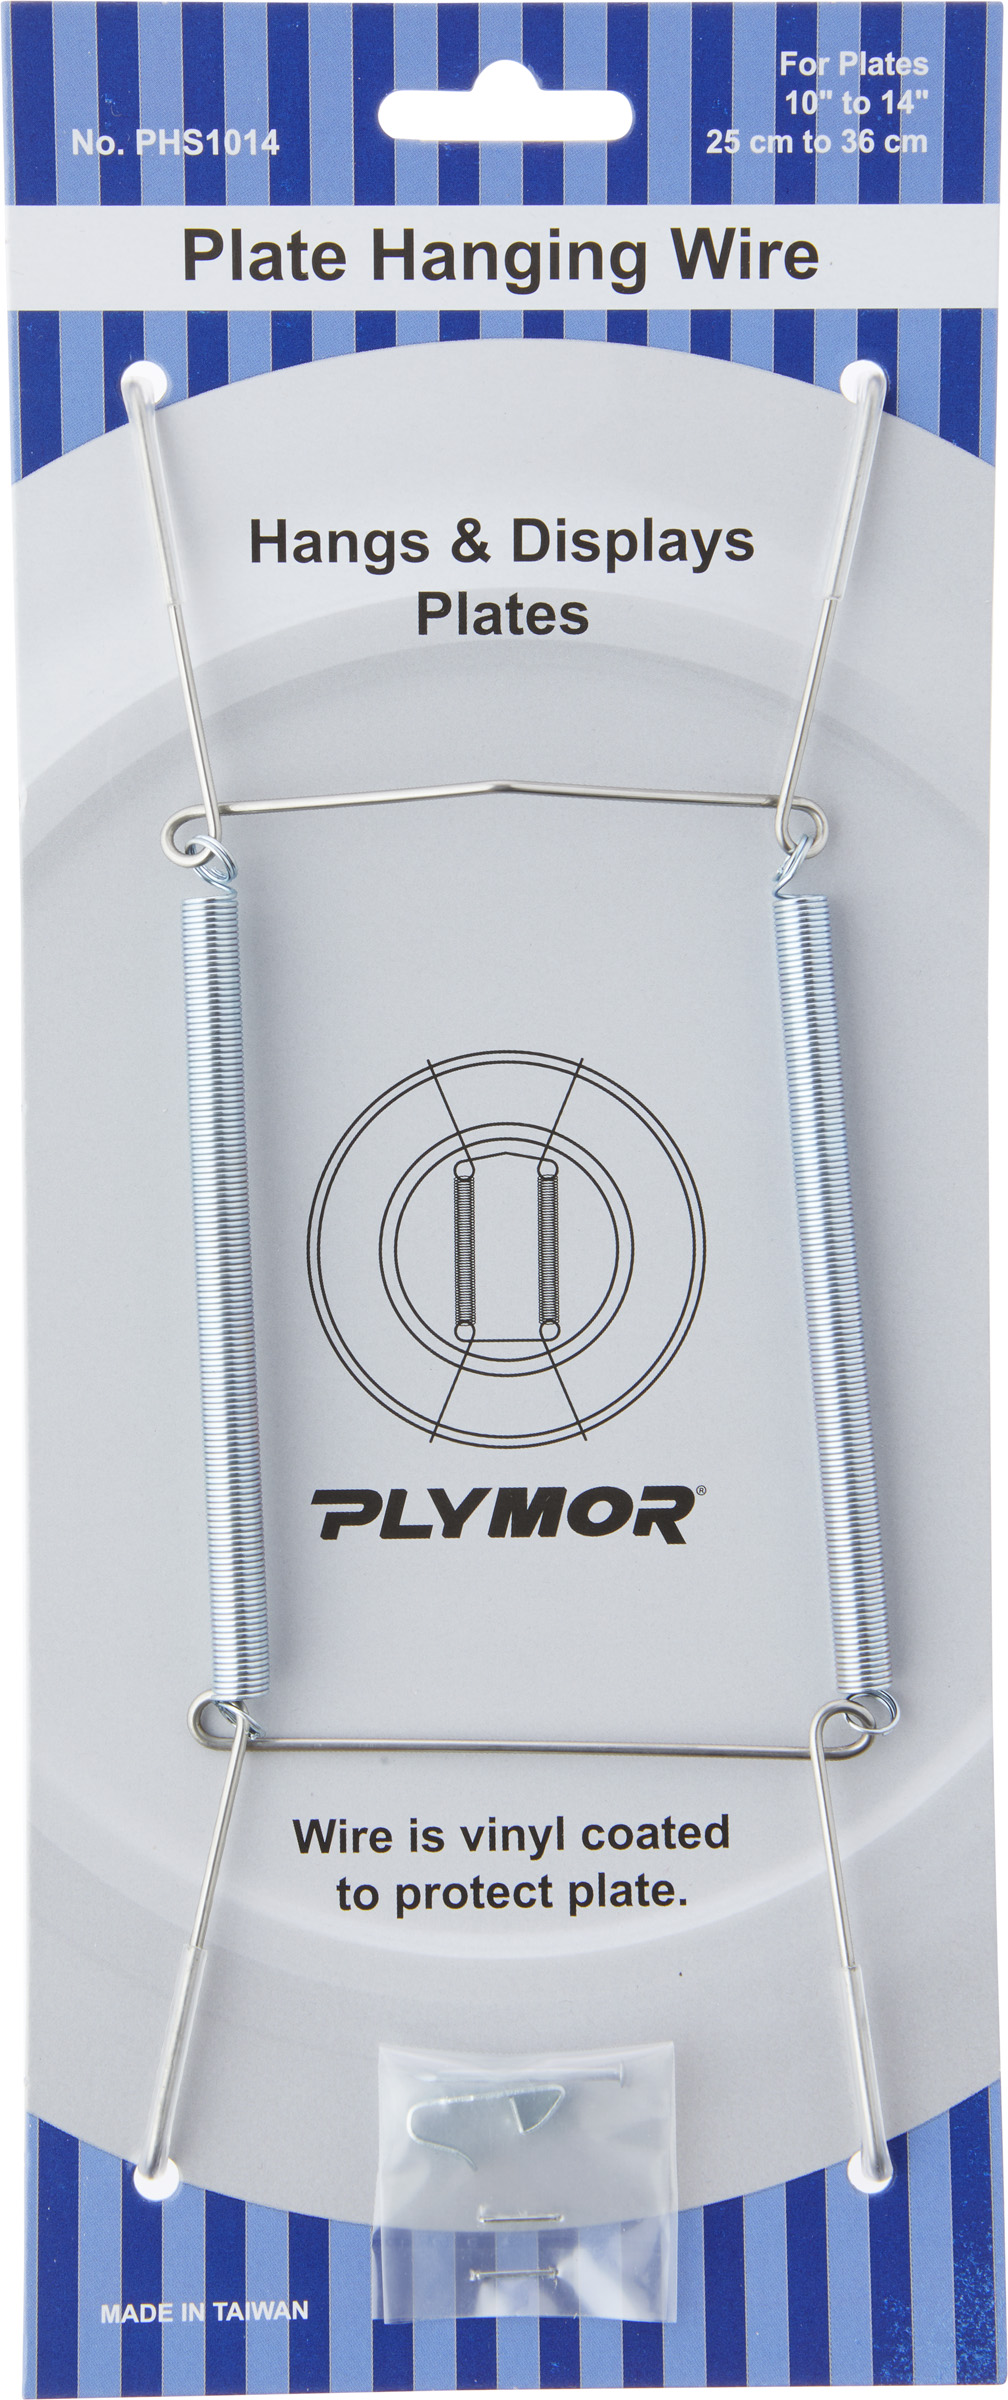 Plymor Stainless Steel Wall Mountable Plate Hanger, 8" H x 3" W x 0.5" D (For Plates 10" - 14")